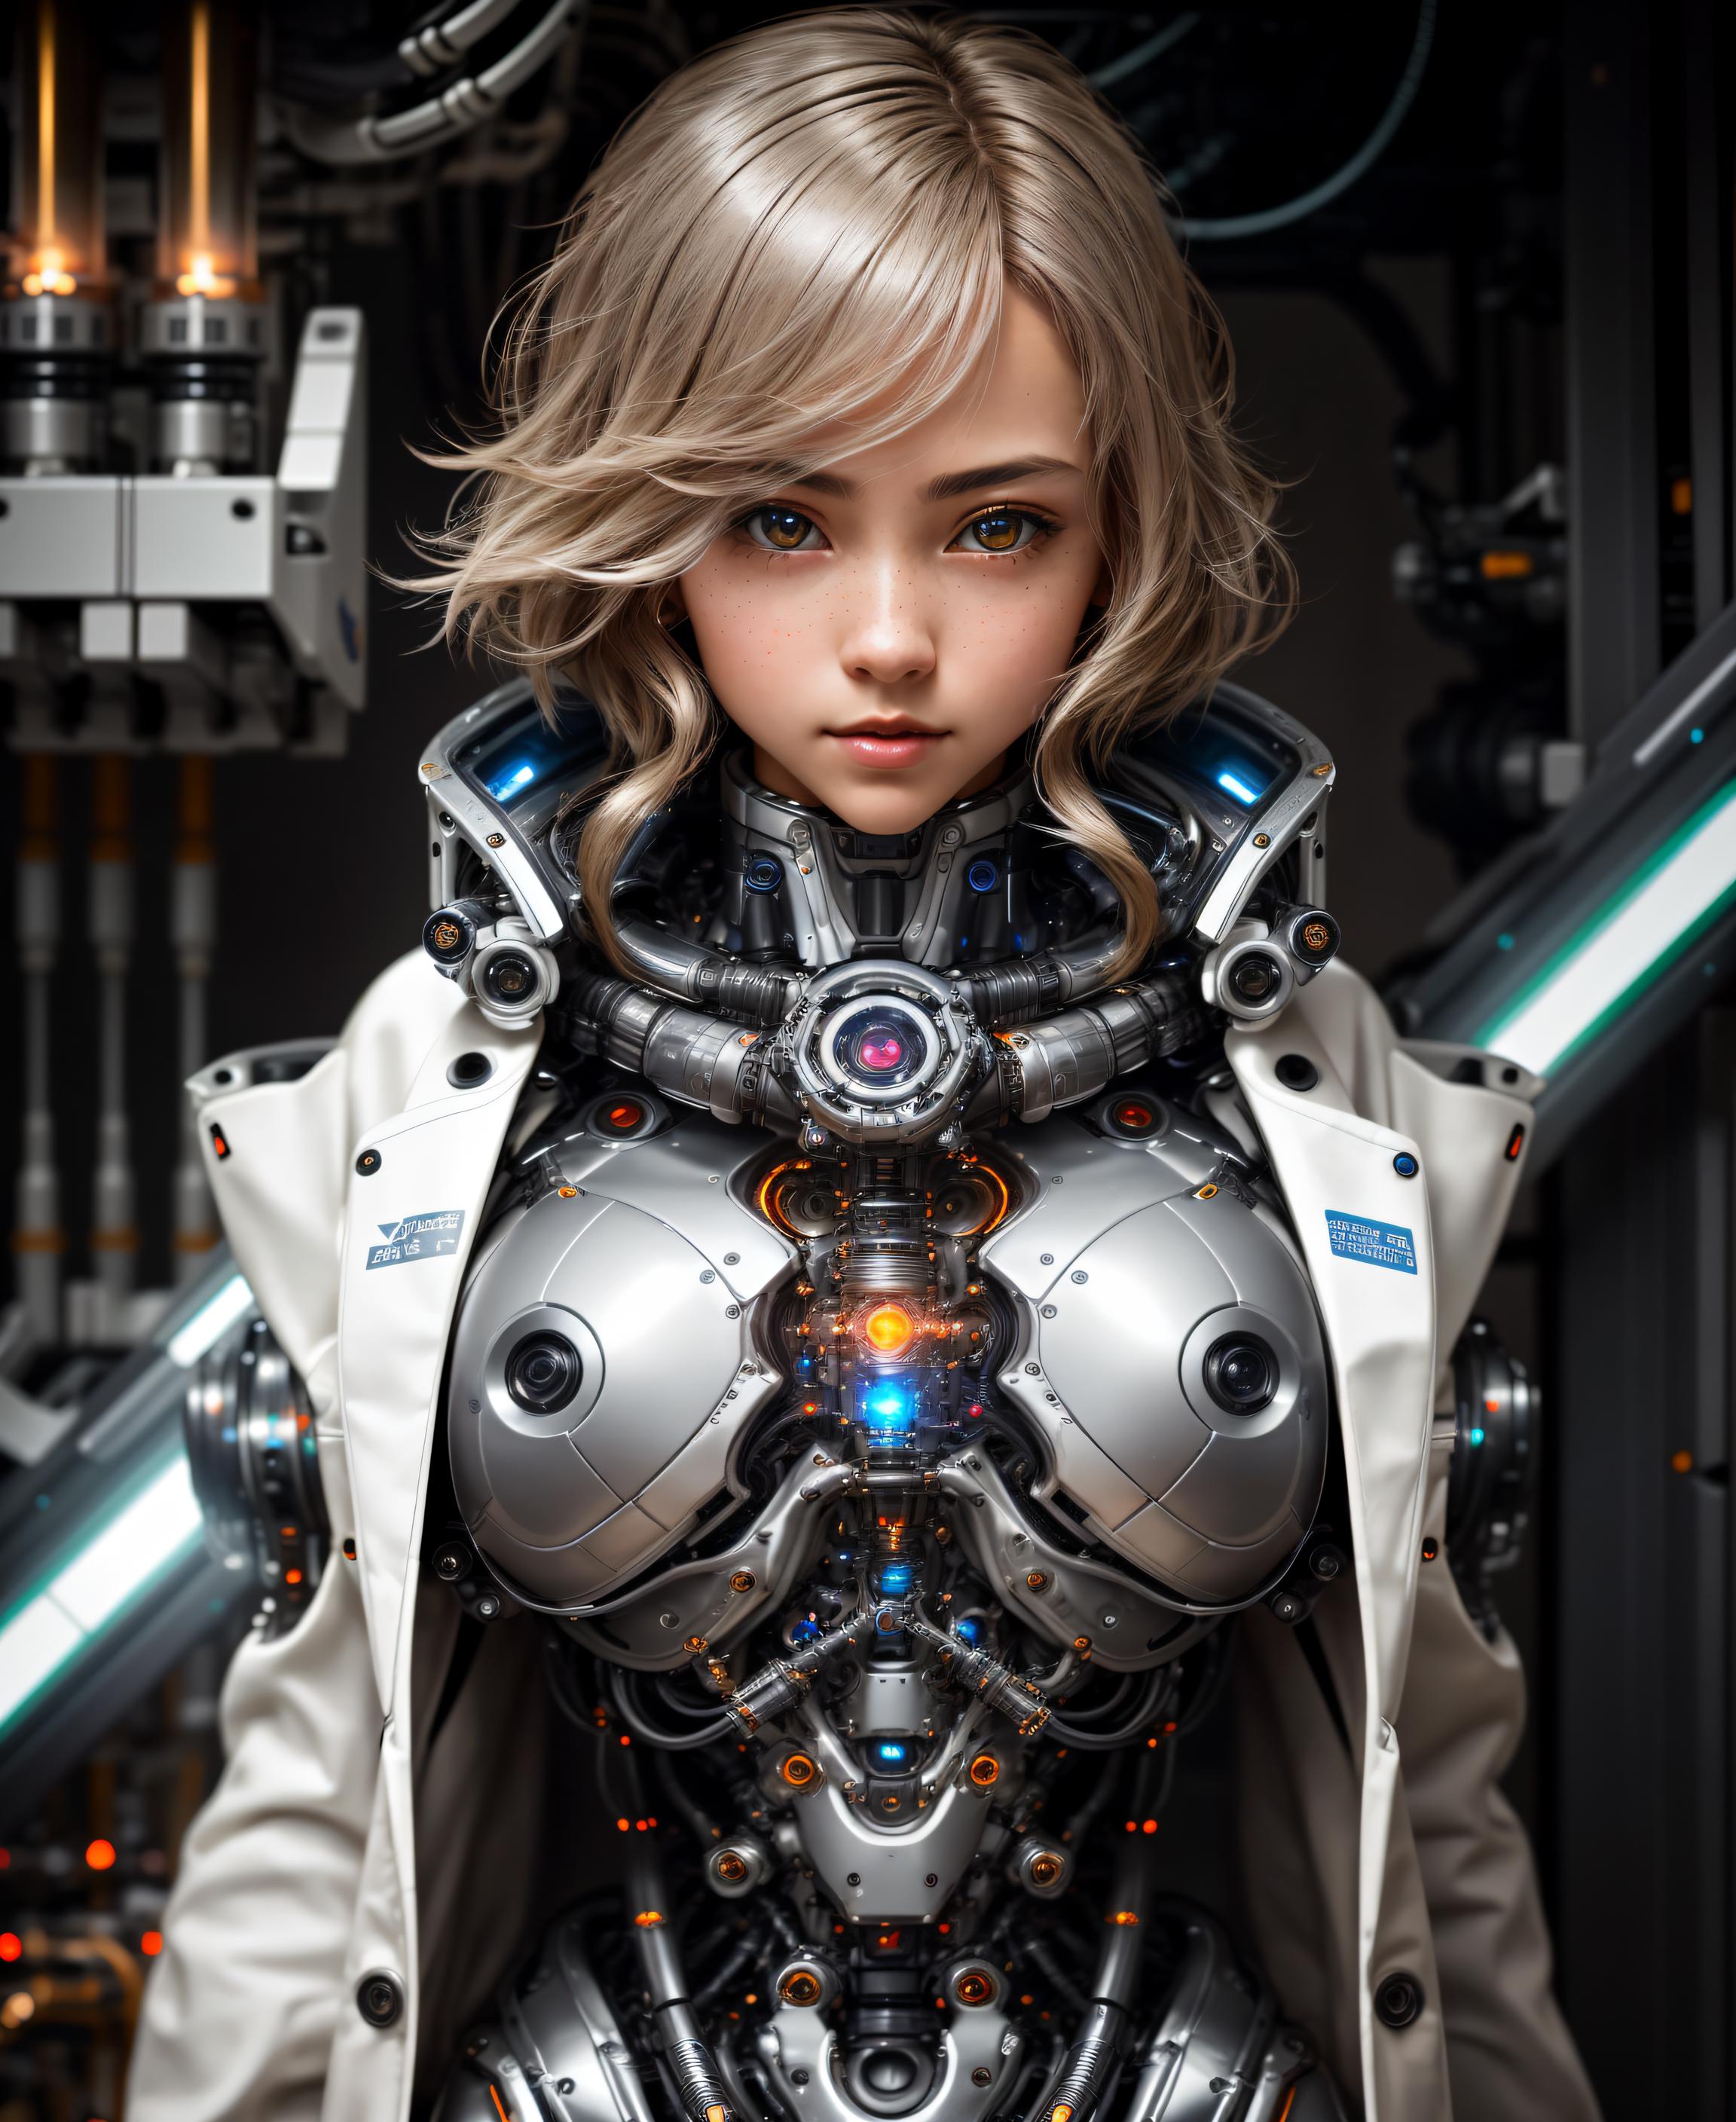 A robotic woman in a white jacket with blue eyes.